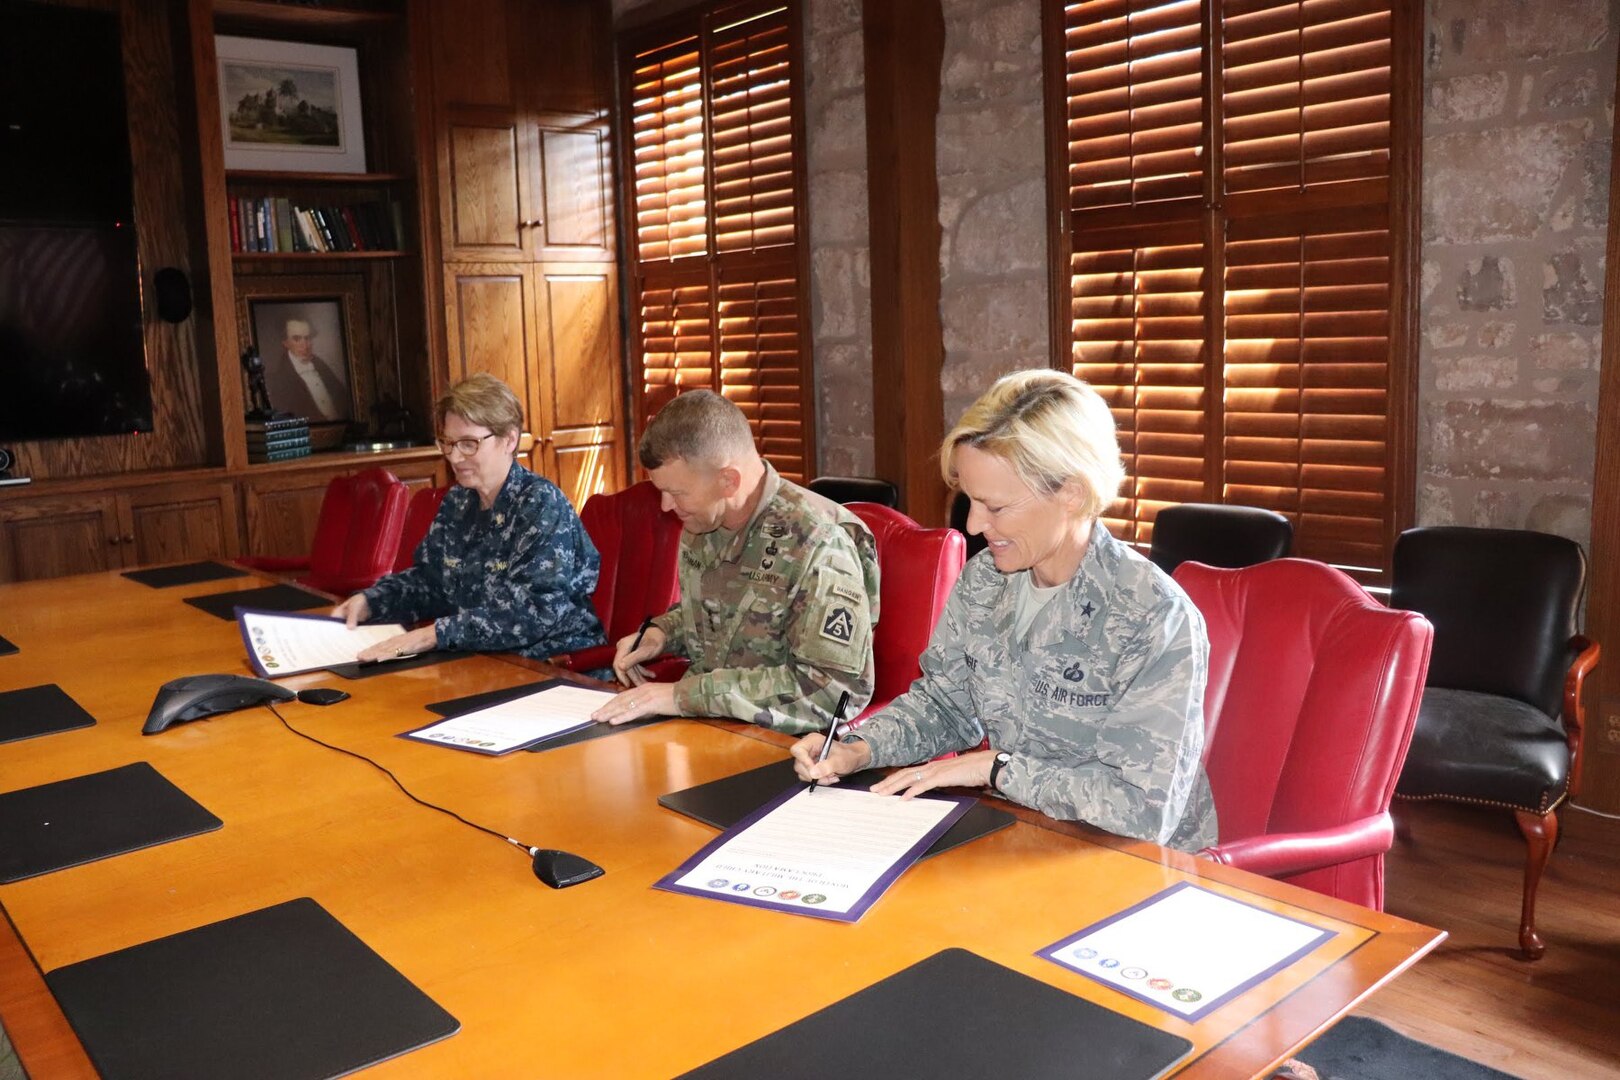 (From left) Rear Adm. Rebecca McCormick-Boyle, commander, Navy Medicine Education, Training and Logistics Command; Lt. Gen. Jeffrey Buchanan, commanding general, U.S. Army North (Fifth Army); and Brig. Gen. Heather Pringle, commander, 502nd Air Base Wing and Joint Base San Antonio joined together April 12 with students, local educators and representatives from the Fort Sam Houston and Lackland Independent School Districts to recognize and honor the commitment, contributions and sacrifices children and youth make to the nation.